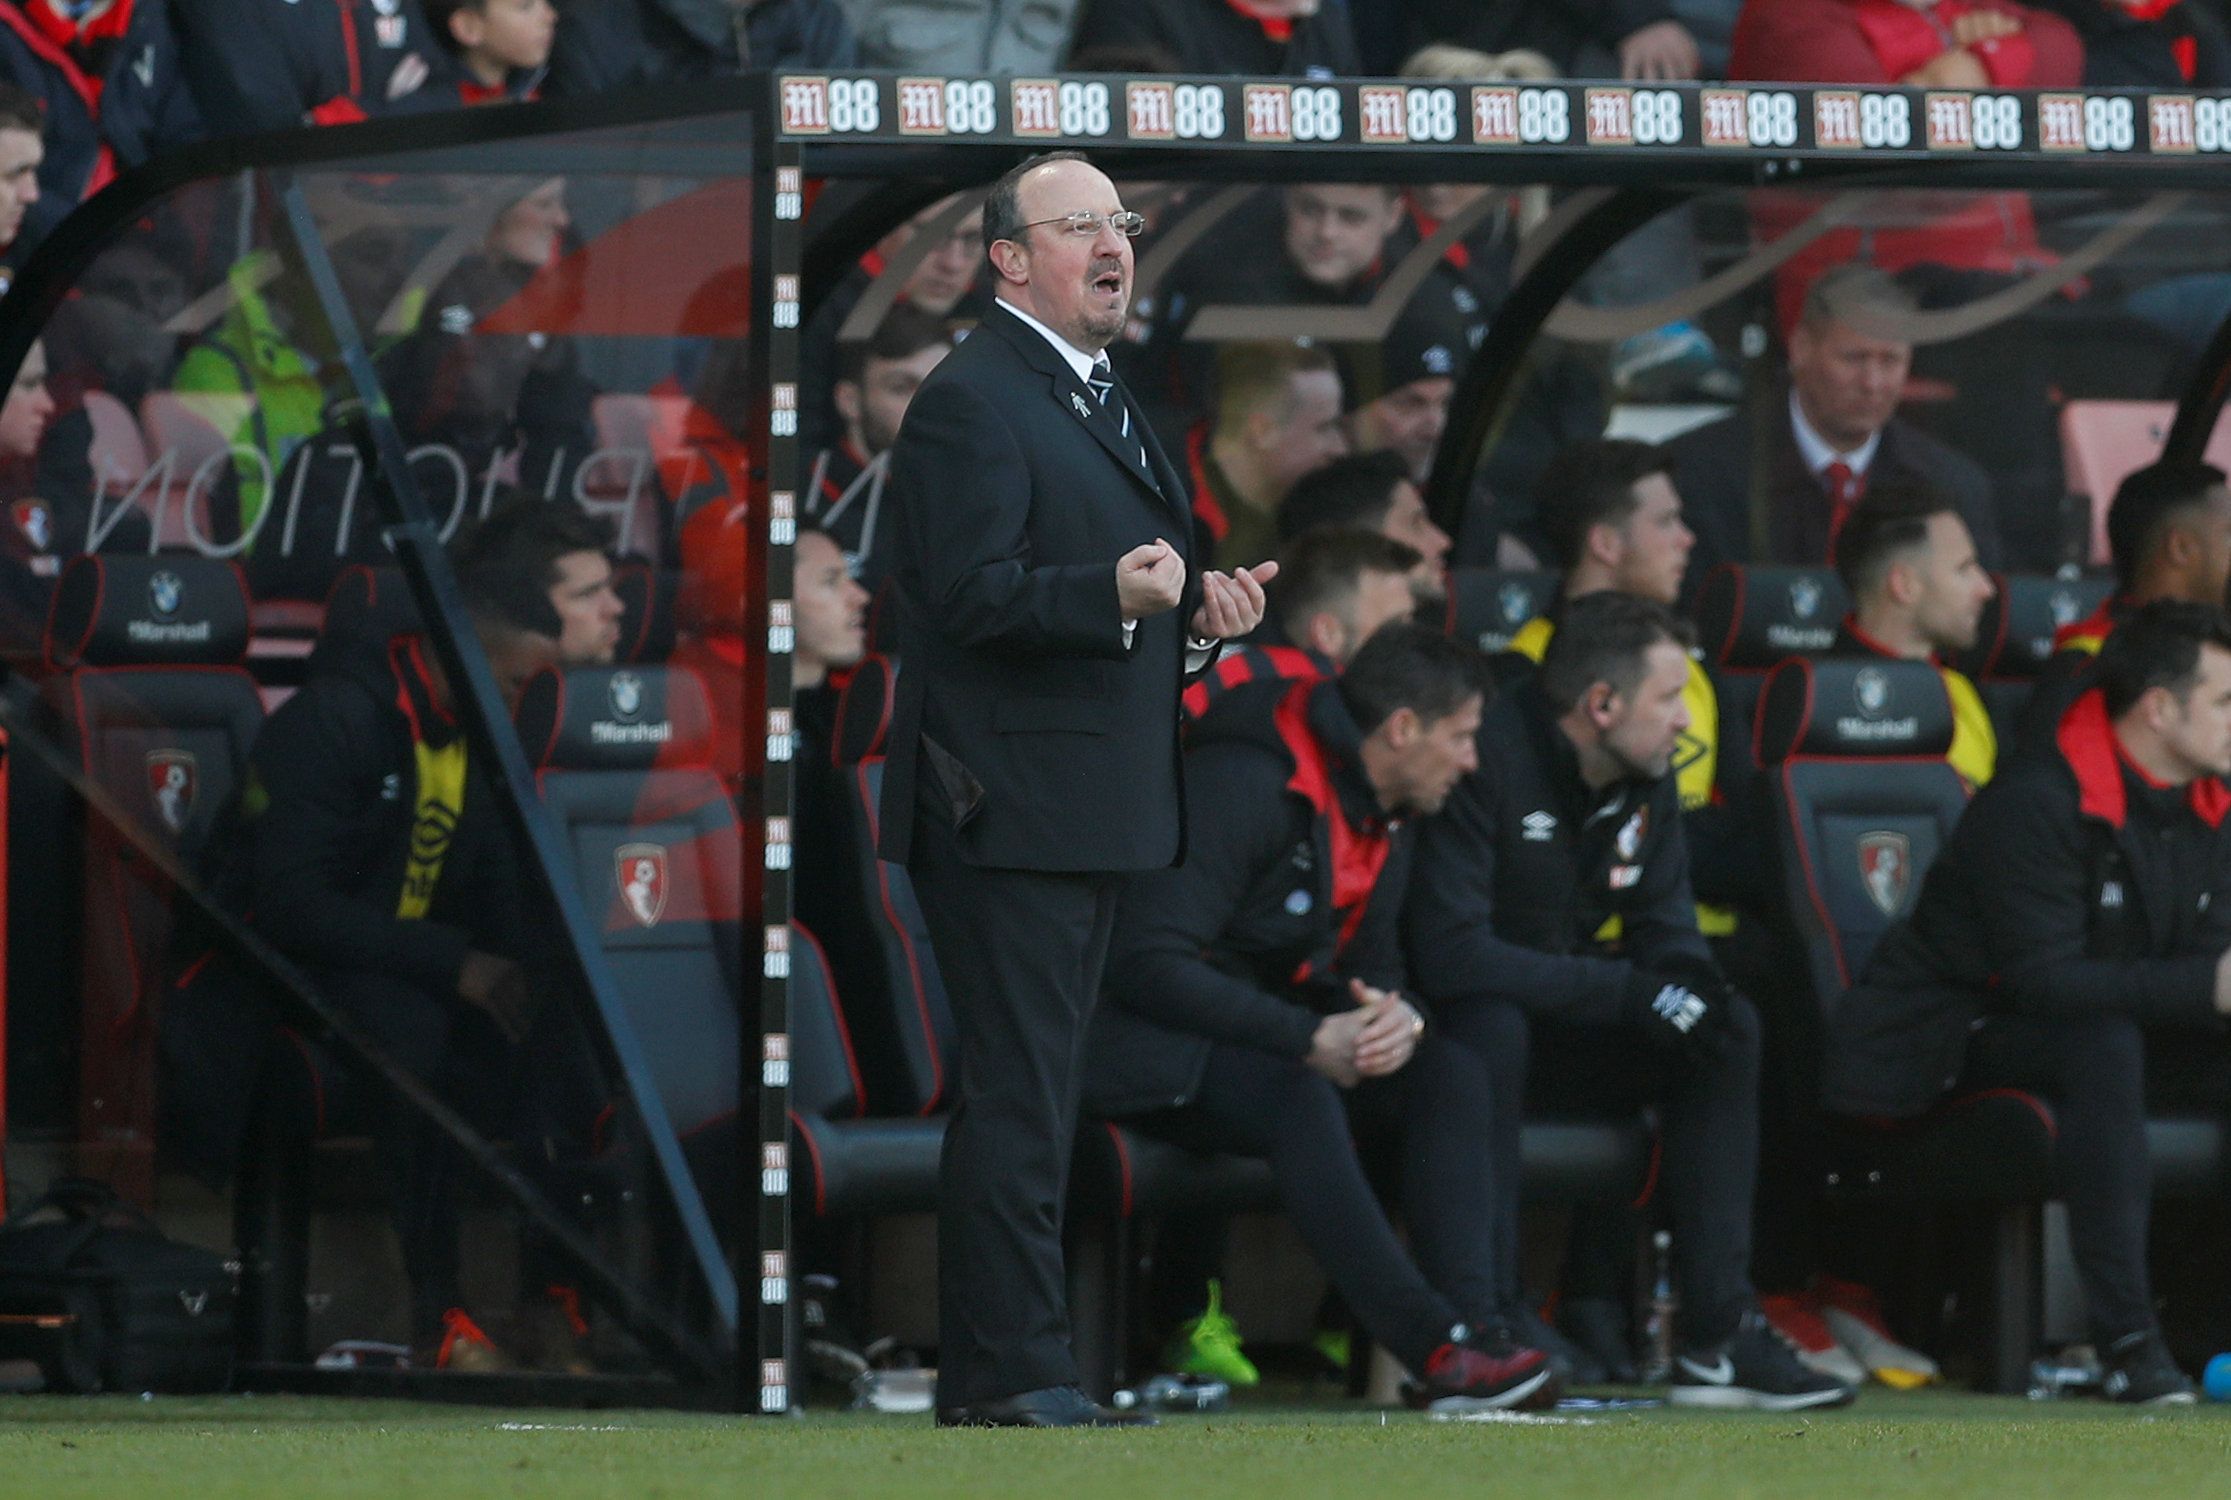 Soccer Football - Premier League - AFC Bournemouth vs Newcastle United - Vitality Stadium, Bournemouth, Britain - February 24, 2018   Newcastle United manager Rafael Benitez          Action Images via Reuters/Matthew Childs    EDITORIAL USE ONLY. No use with unauthorized audio, video, data, fixture lists, club/league logos or 